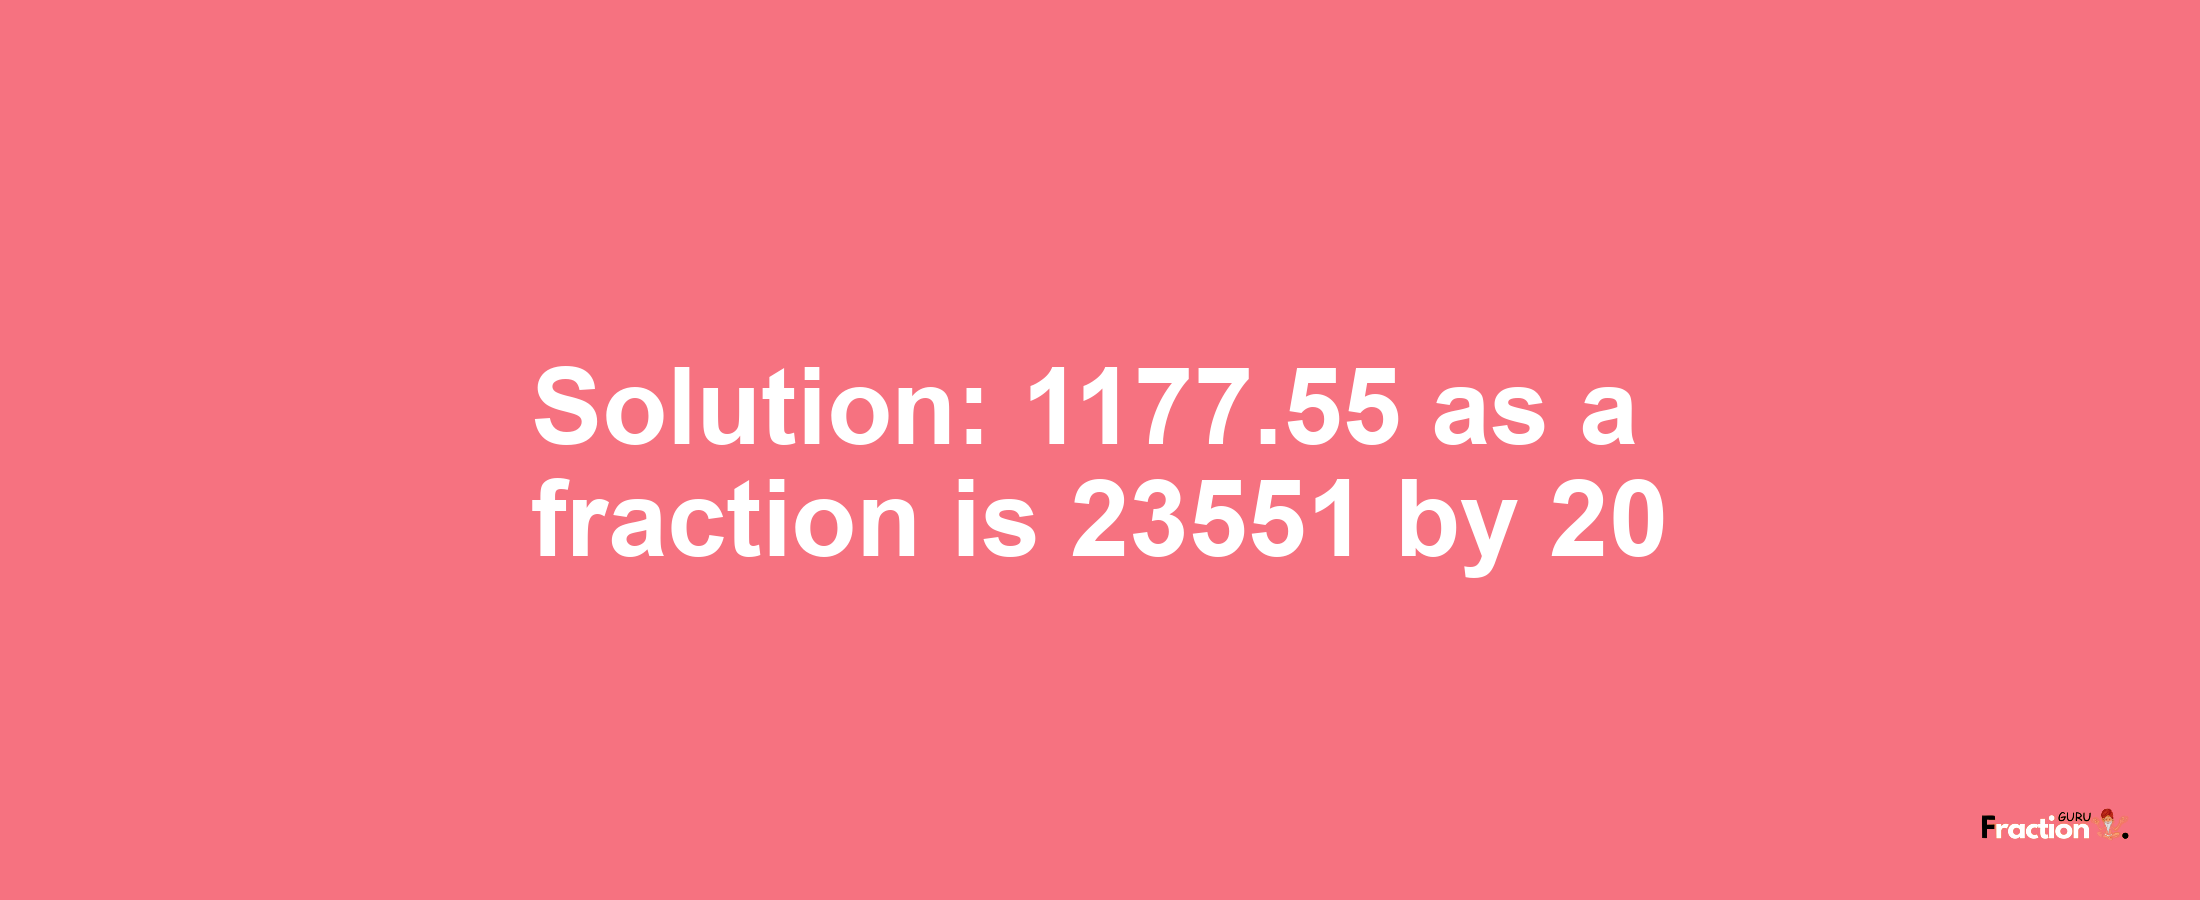 Solution:1177.55 as a fraction is 23551/20